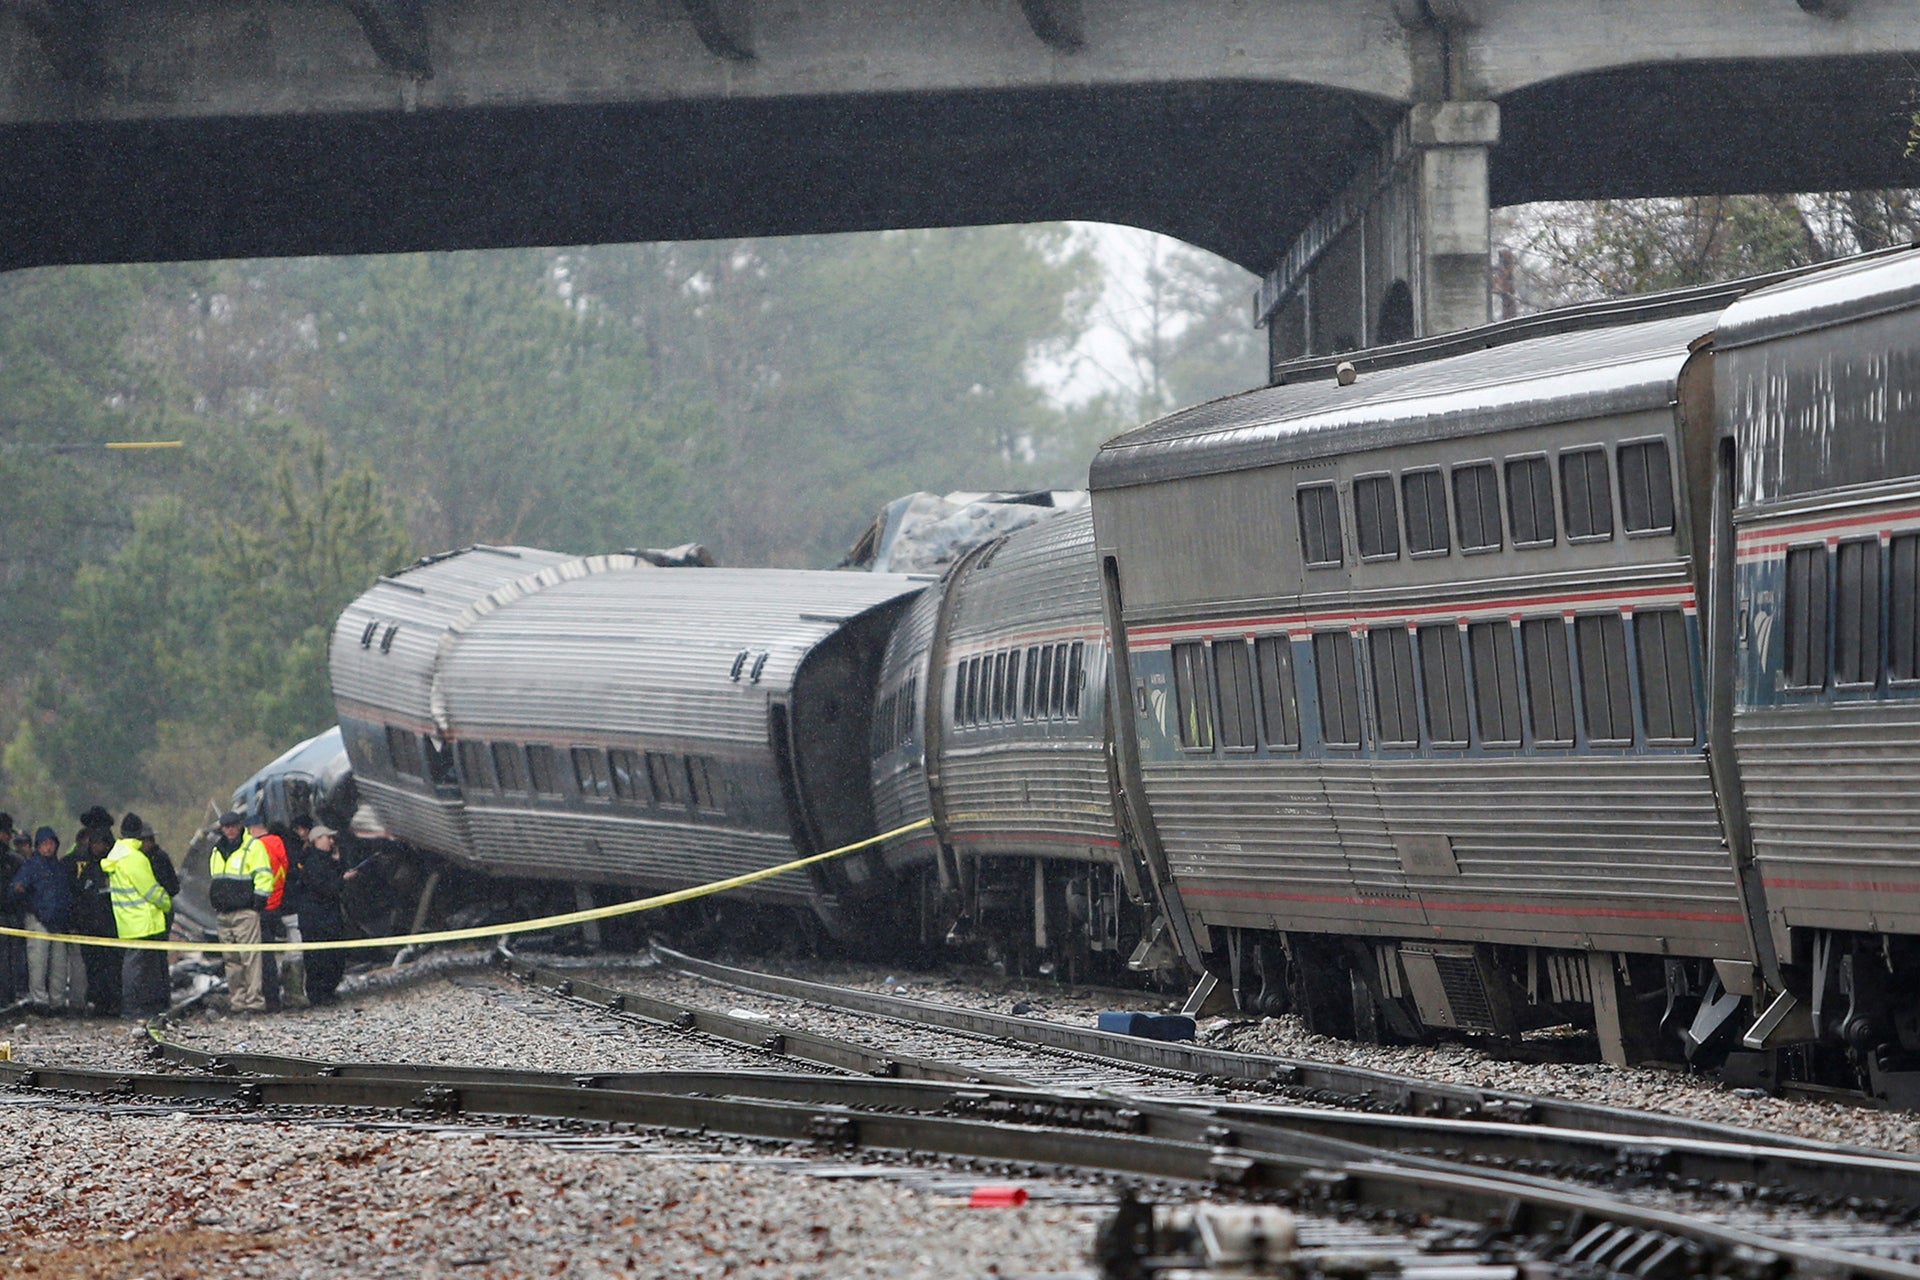 Amtrak train traveling from New York to Miami crashes with freight